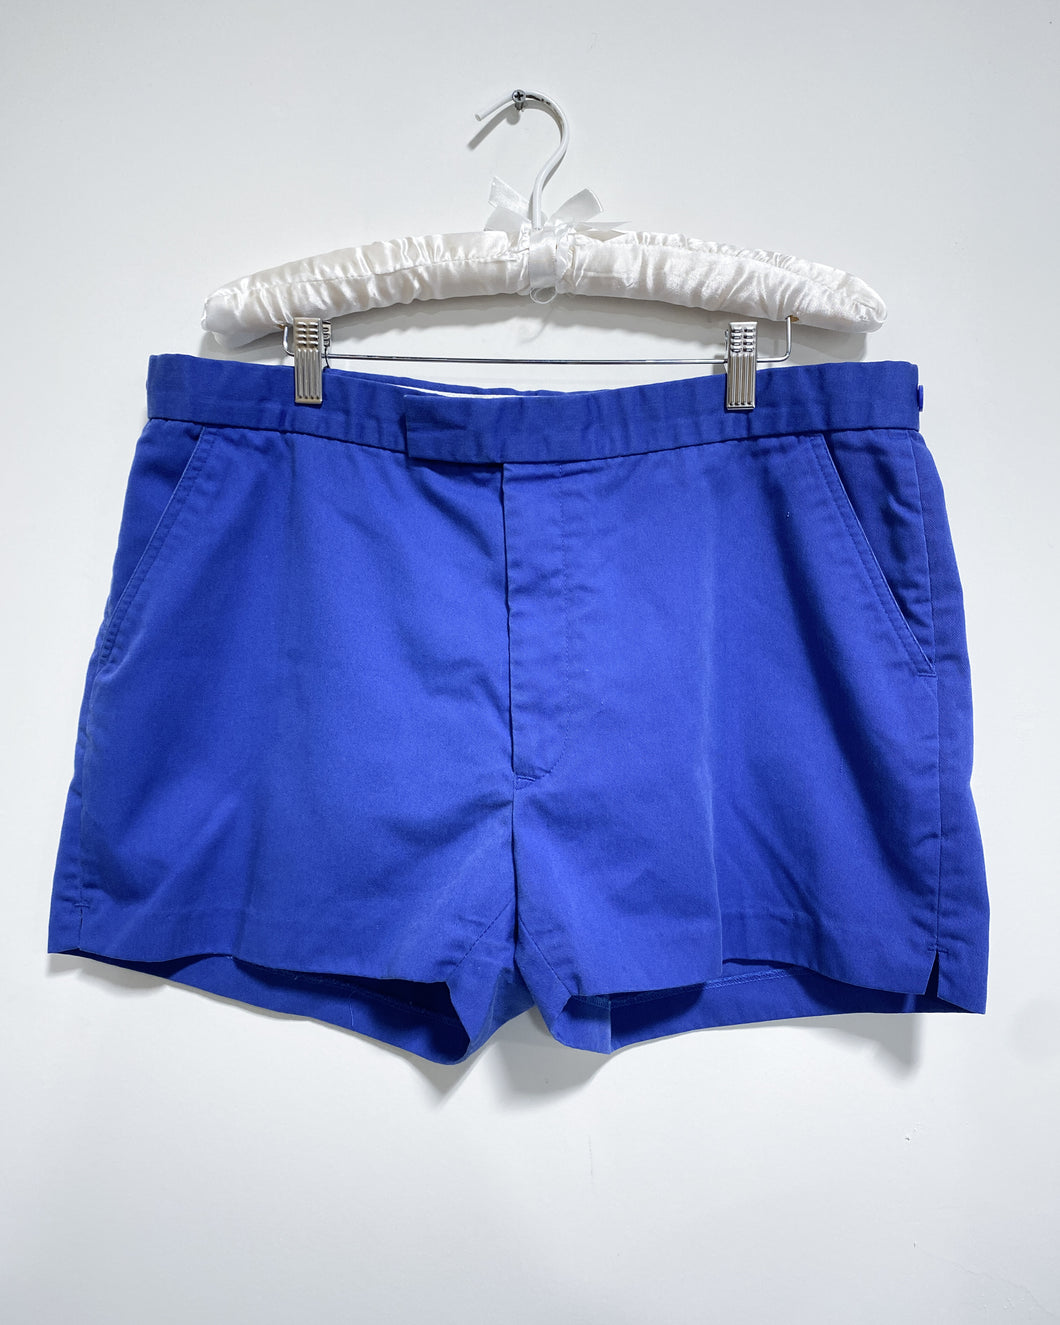 Vintage Actif Sports Shorts with Adjustable Waist (38)